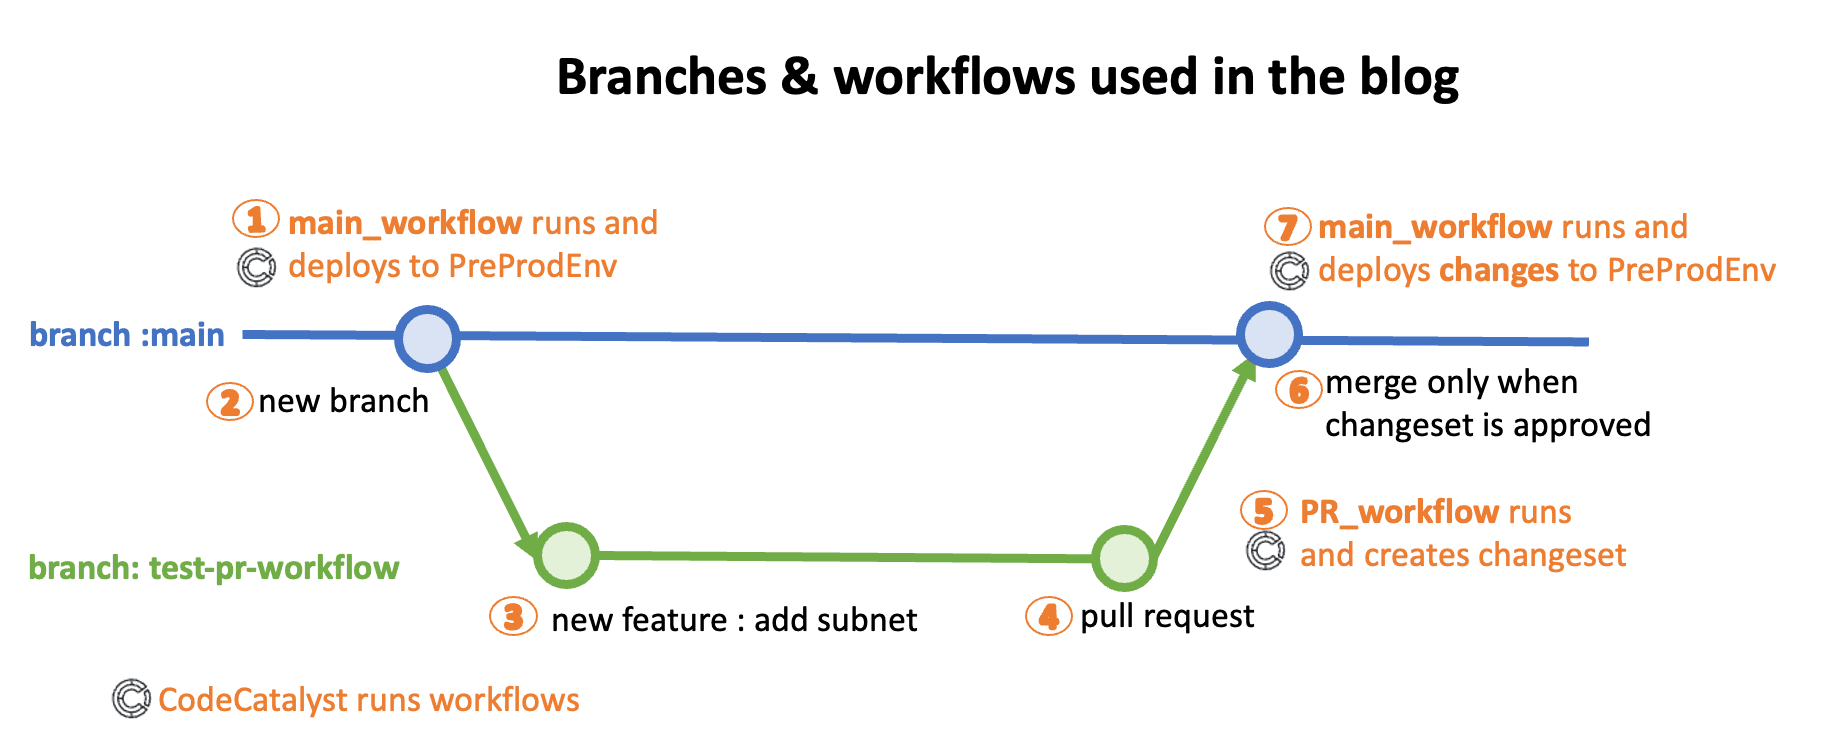 Branches and workflows used in the blog